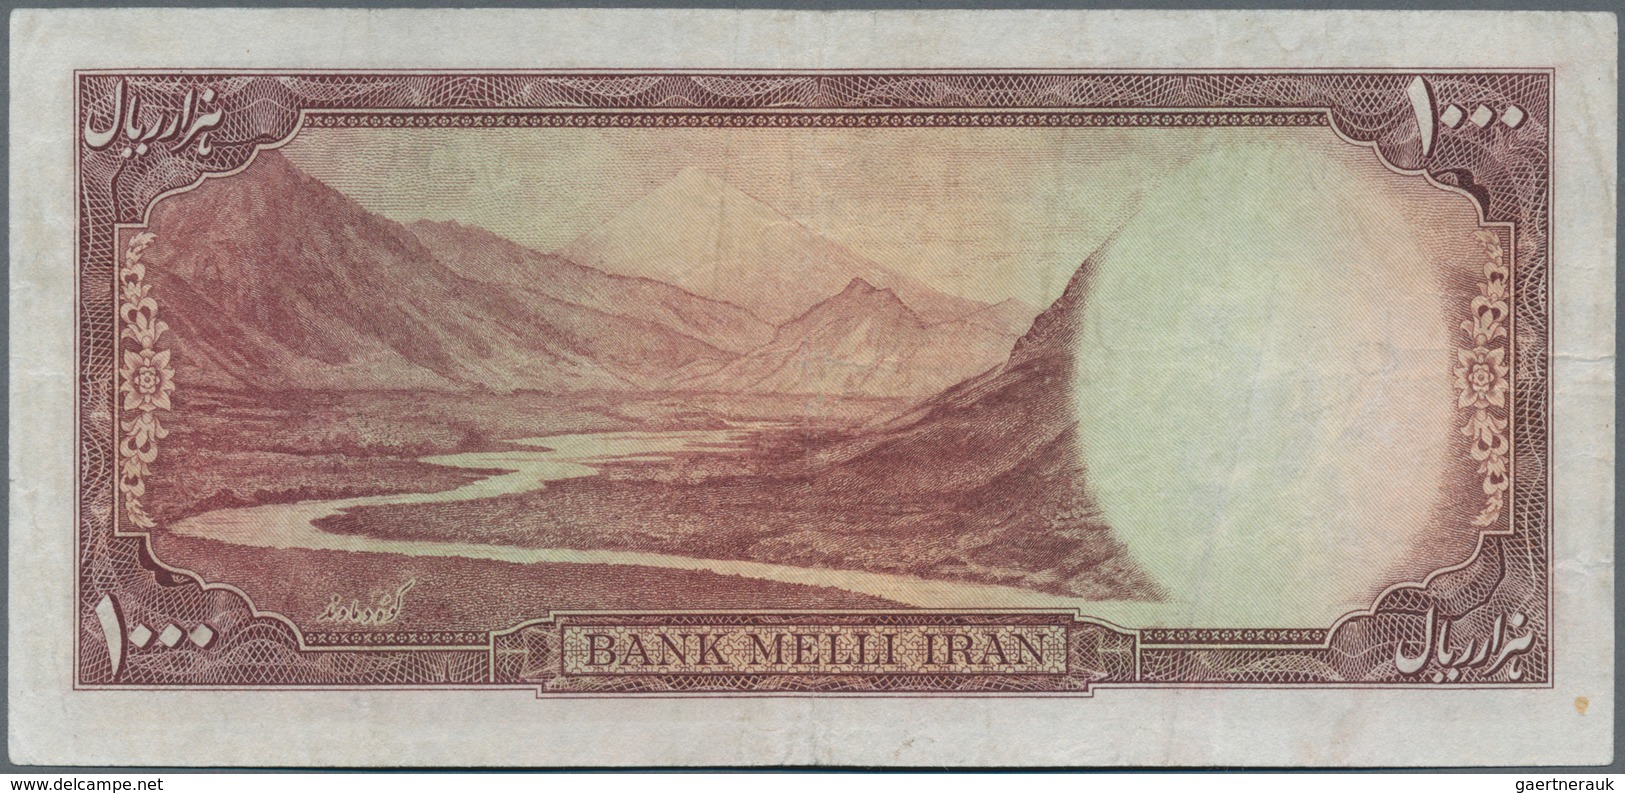 Iran: 1000 Rials ND(1951) P. 53, Used With Light Folds, Pressed, No Holes Or Tears, Still Nice Color - Irán